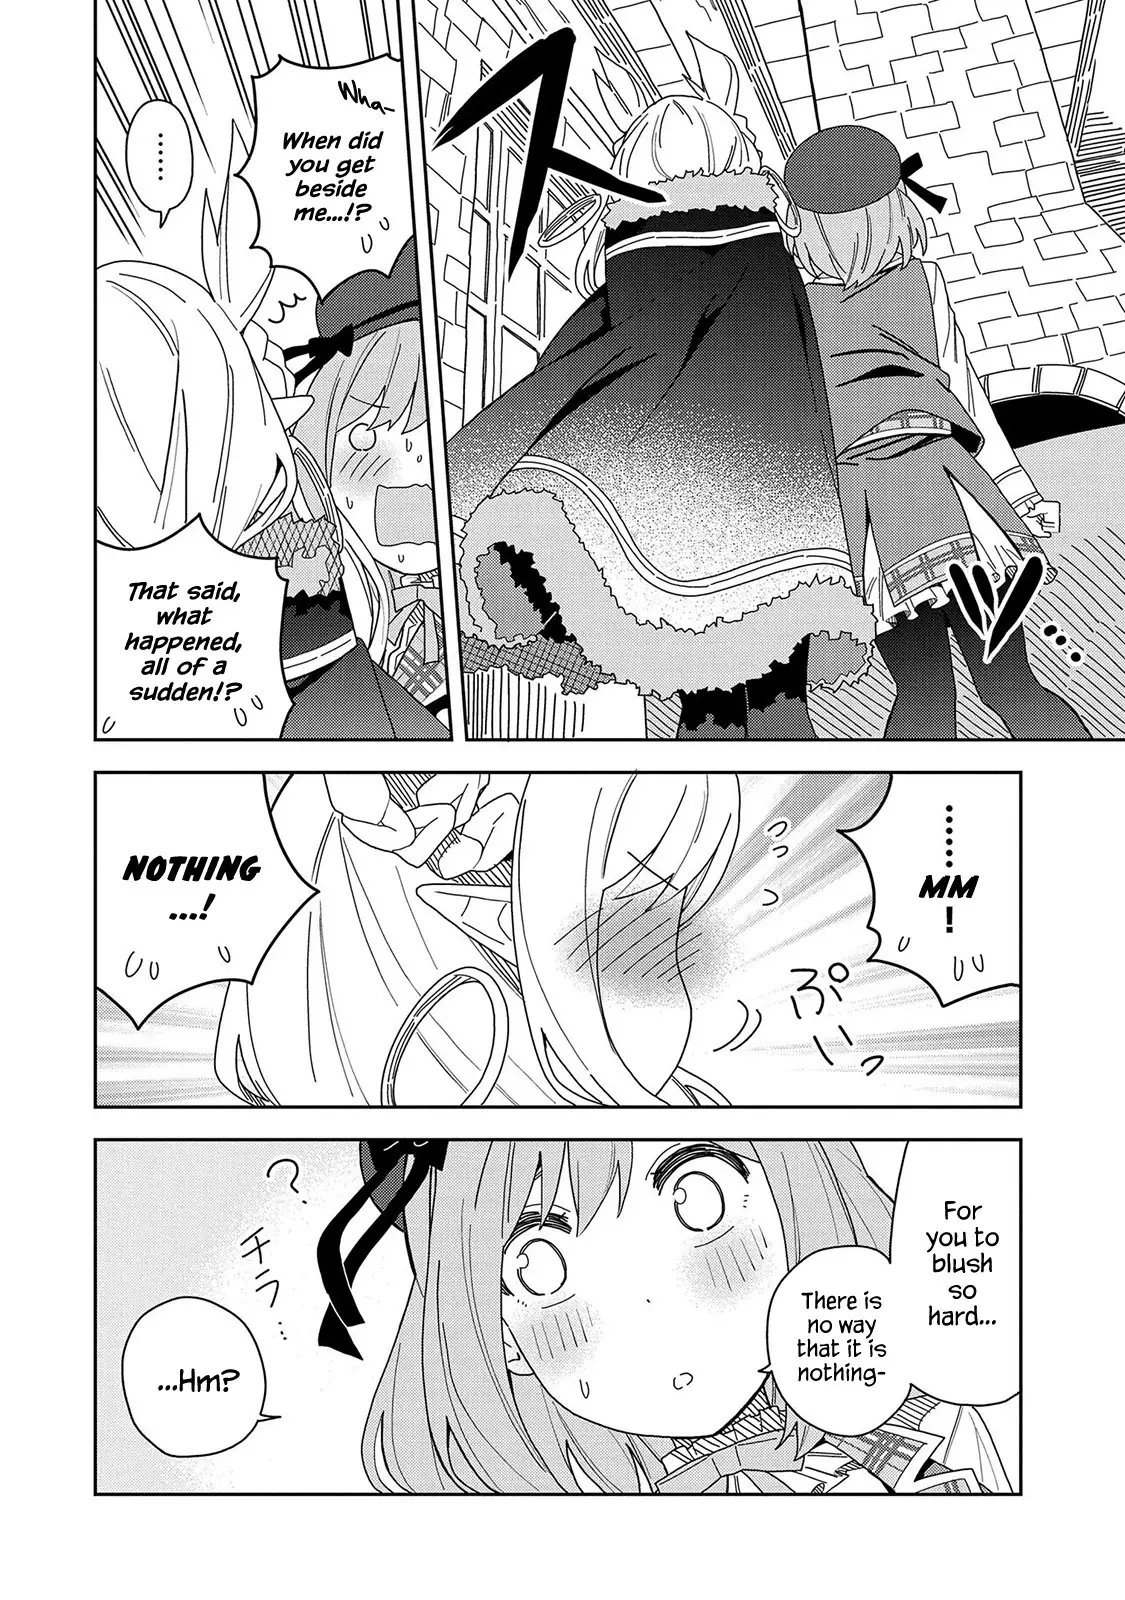 I Summoned The Devil To Grant Me A Wish, But I Married Her Instead Since She Was Adorable ~My New Devil Wife~ - 6 page 24